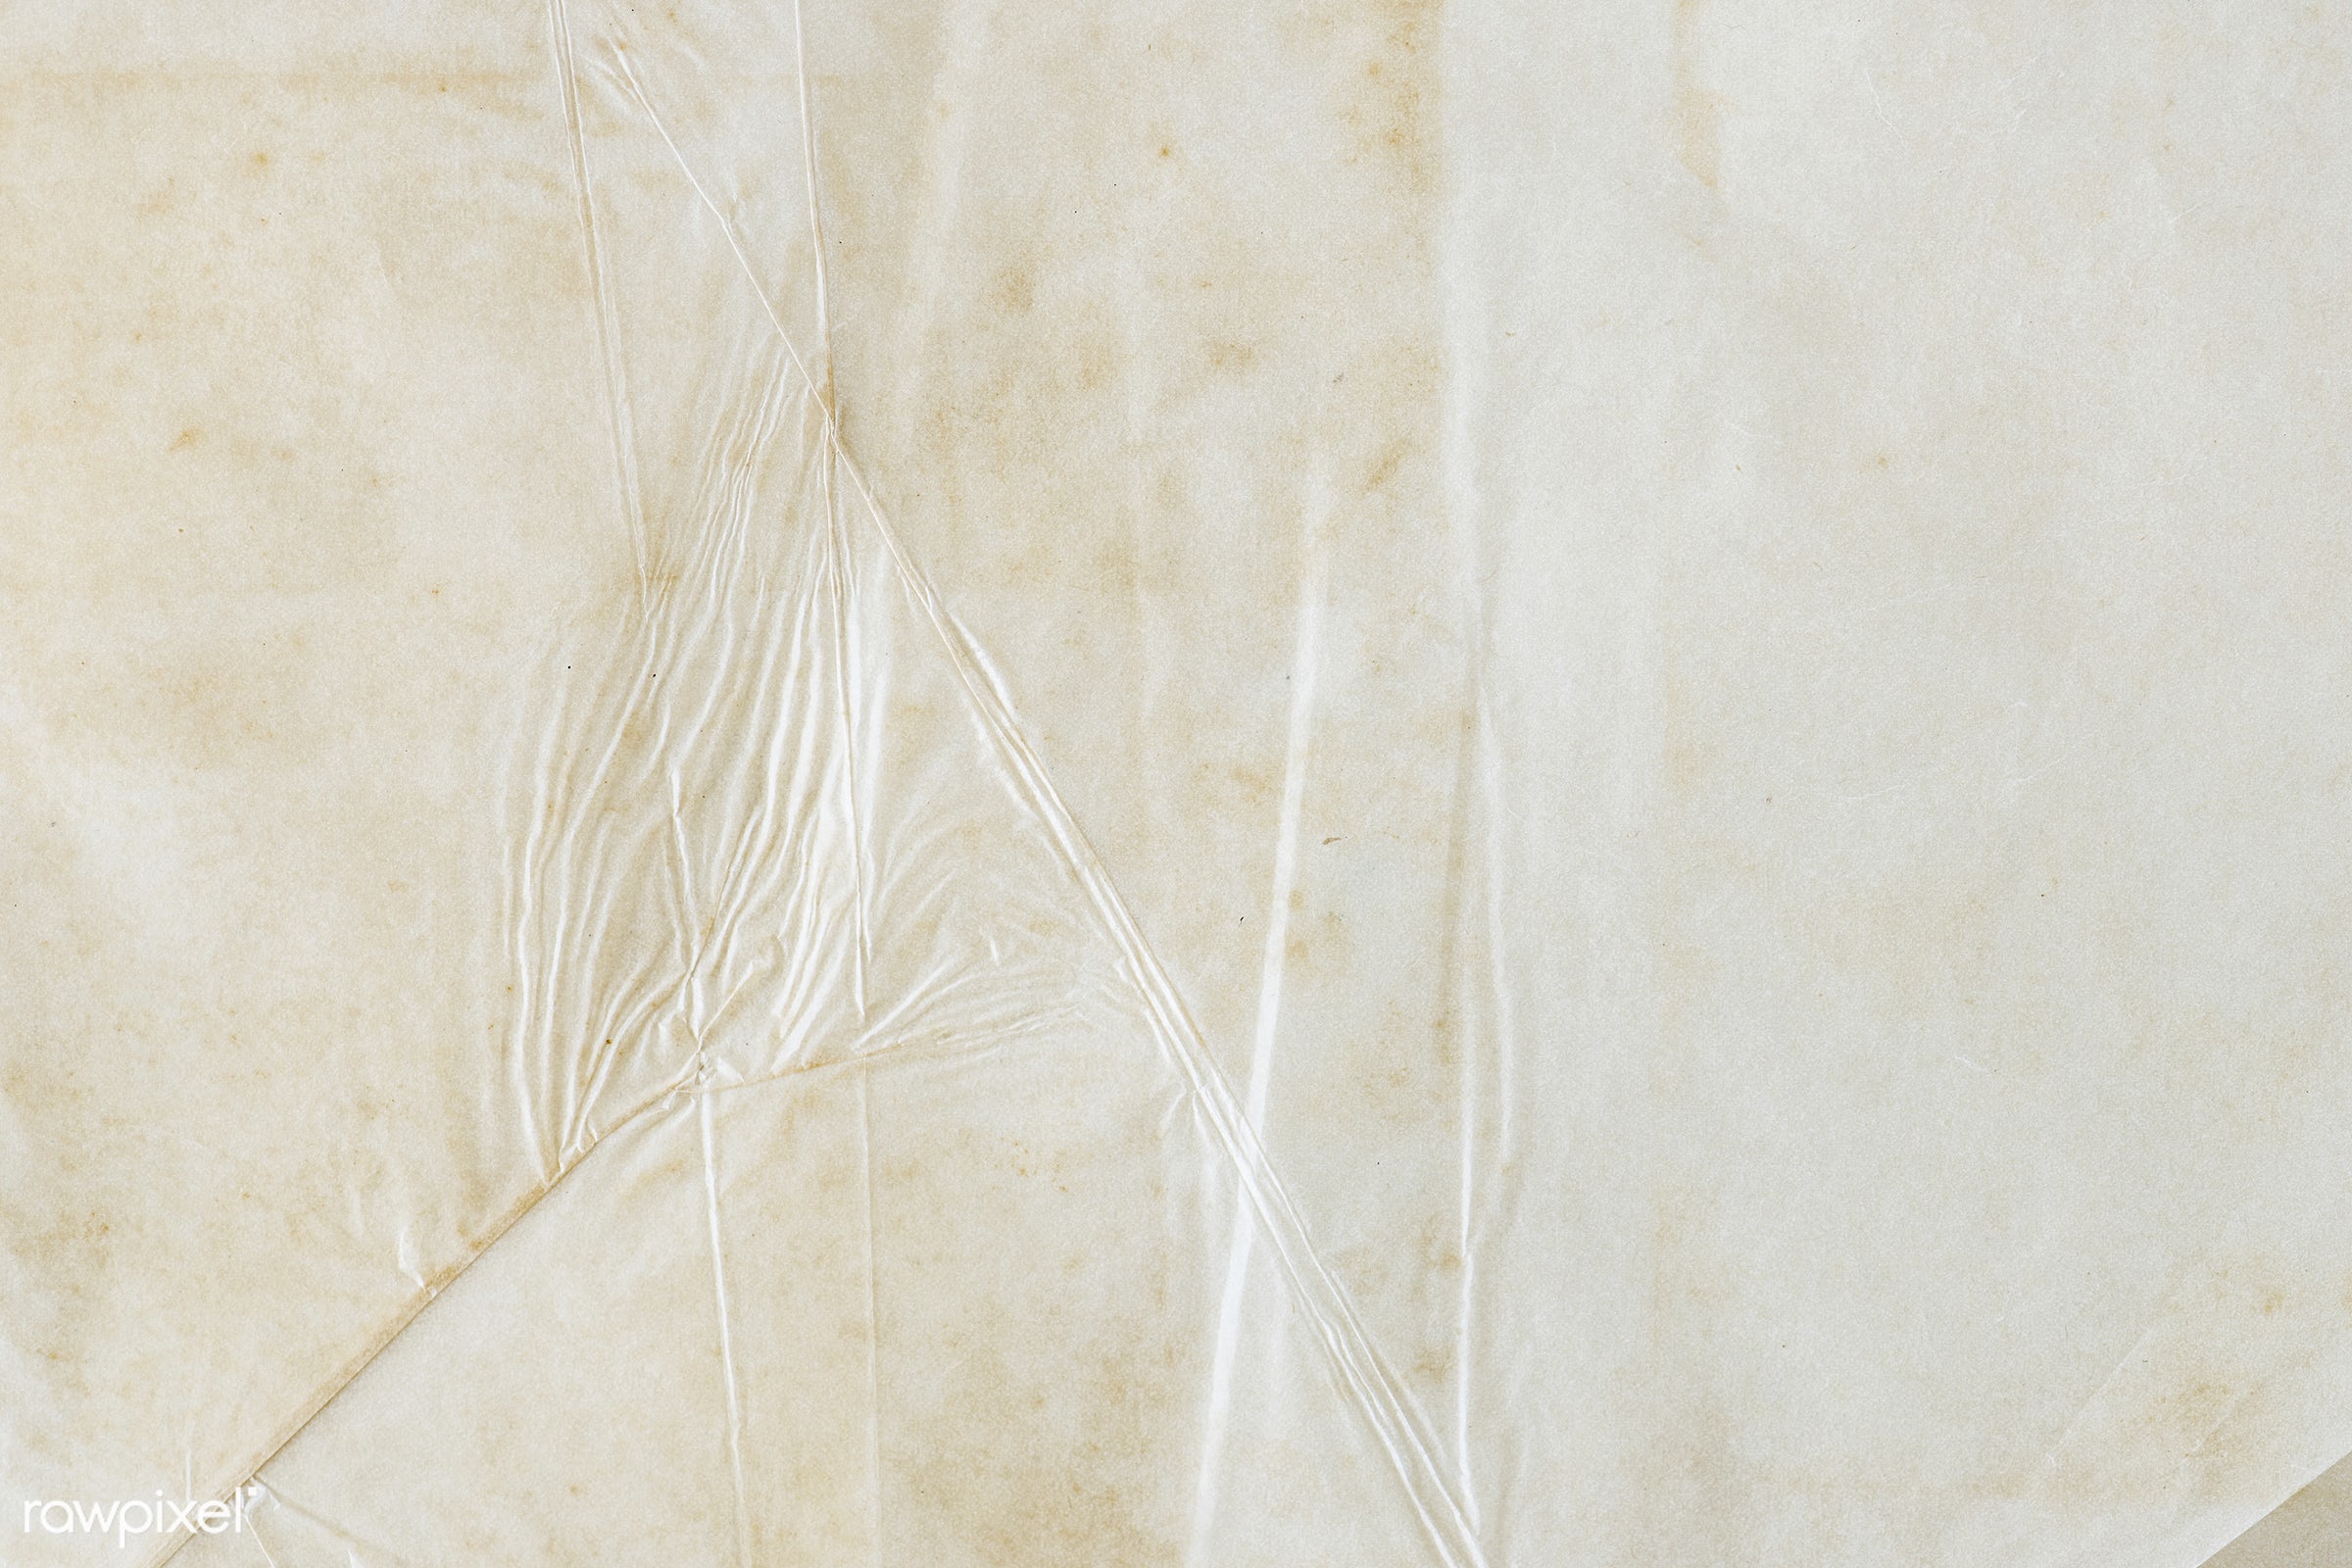 Design space stained paper textured background